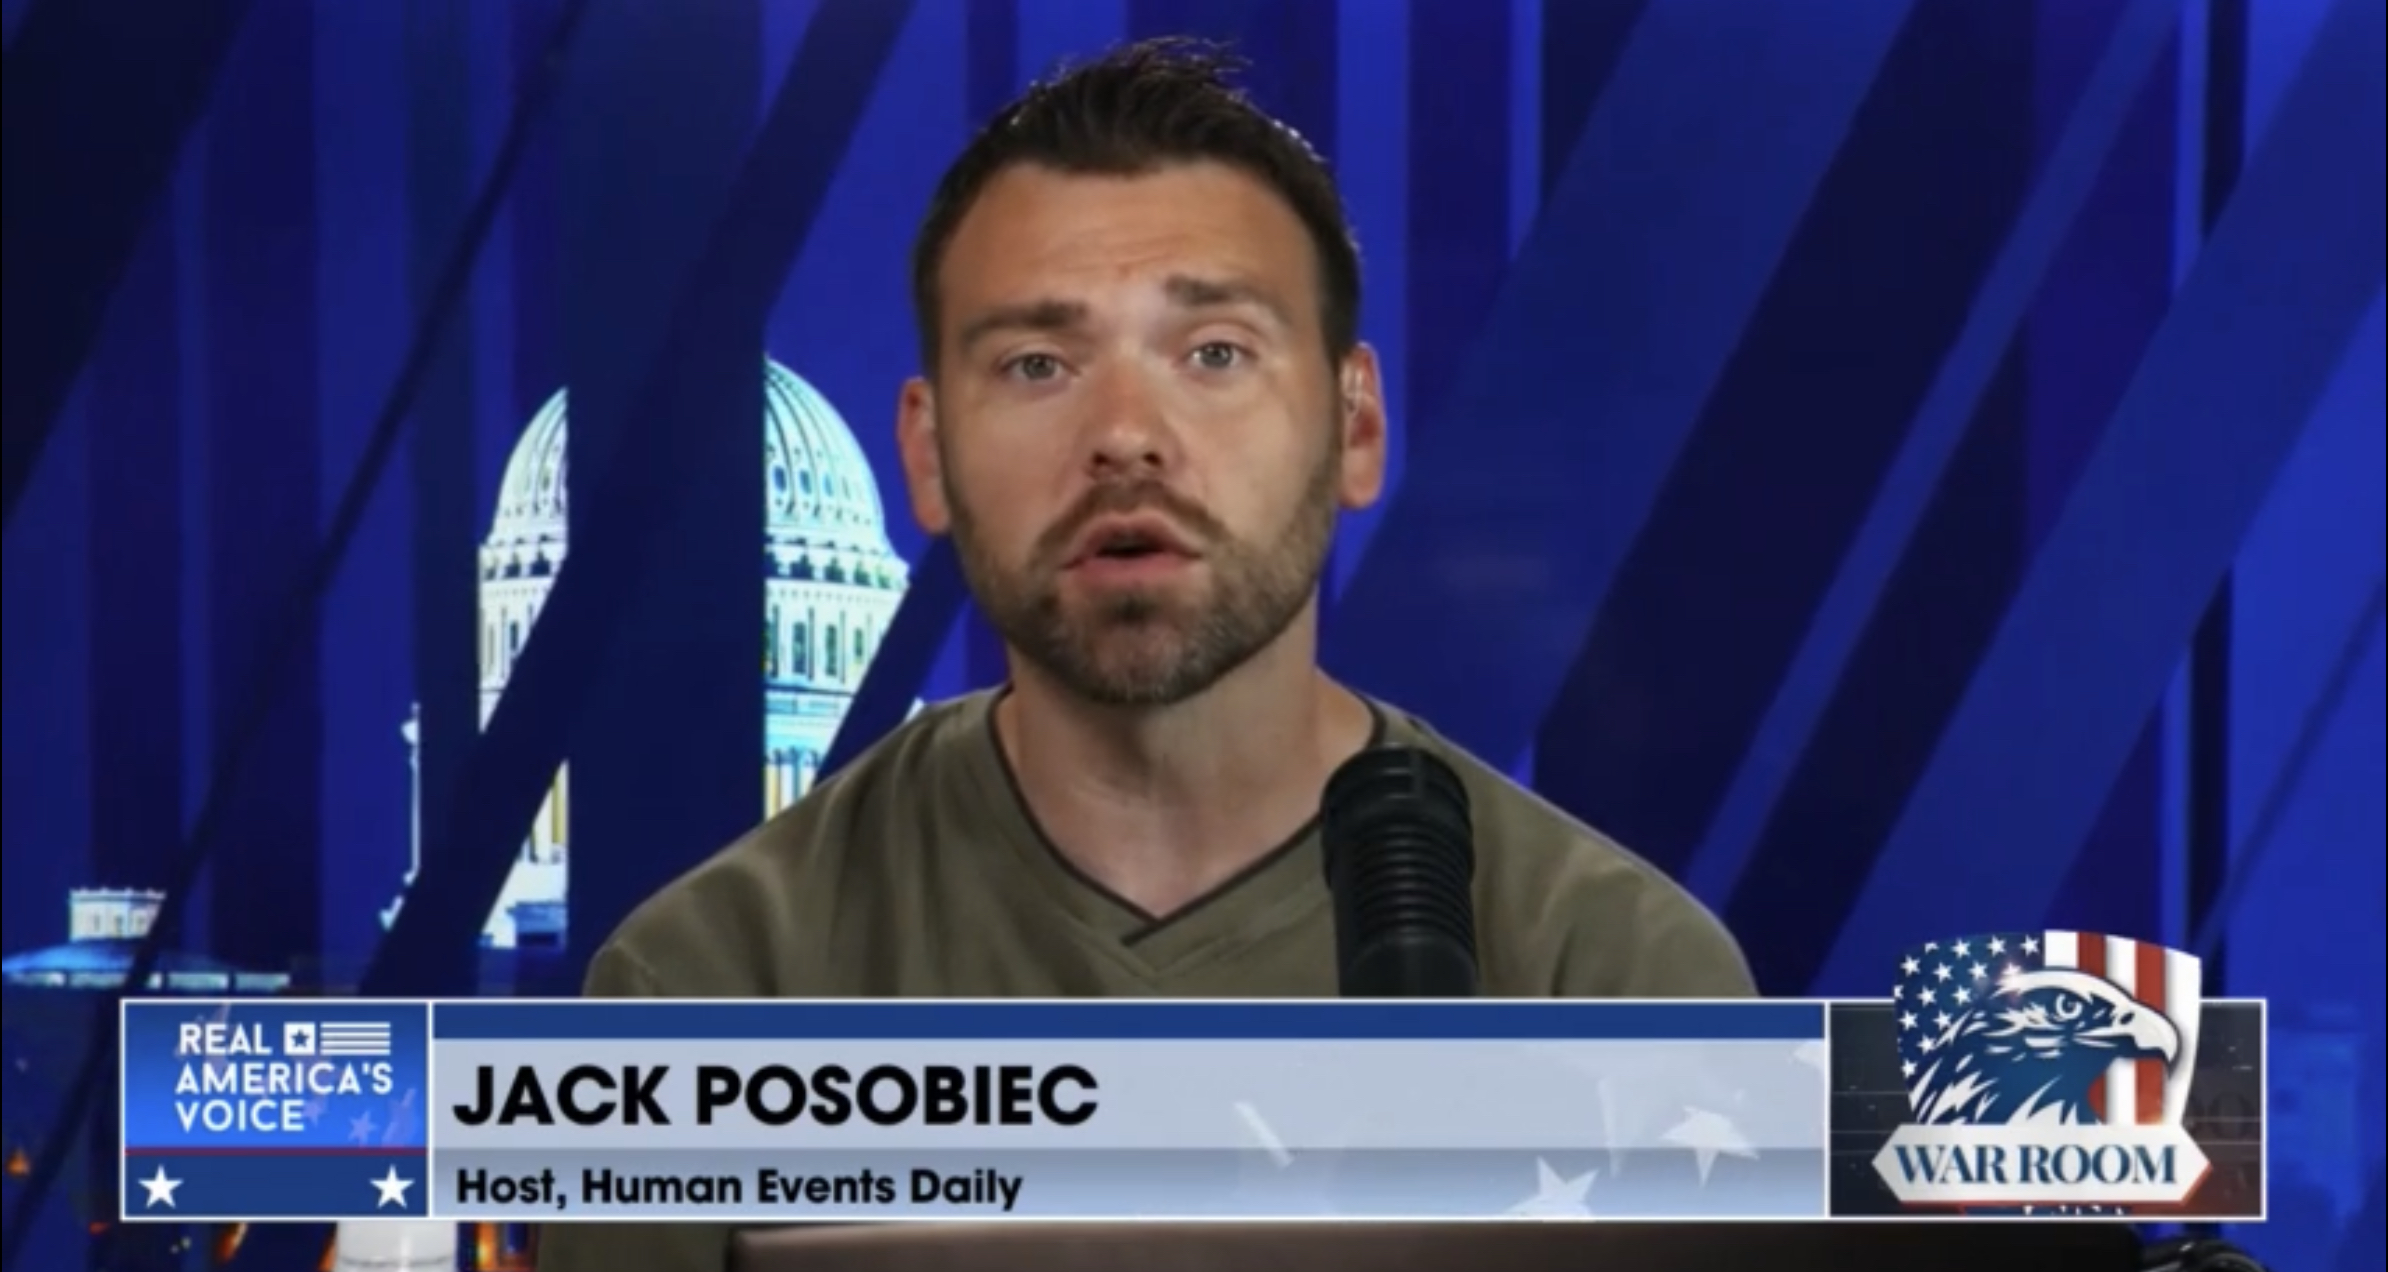 Jack Posobiec: The Globalists Are In Panic Mode Because MAGA’s A Real Threat To Them